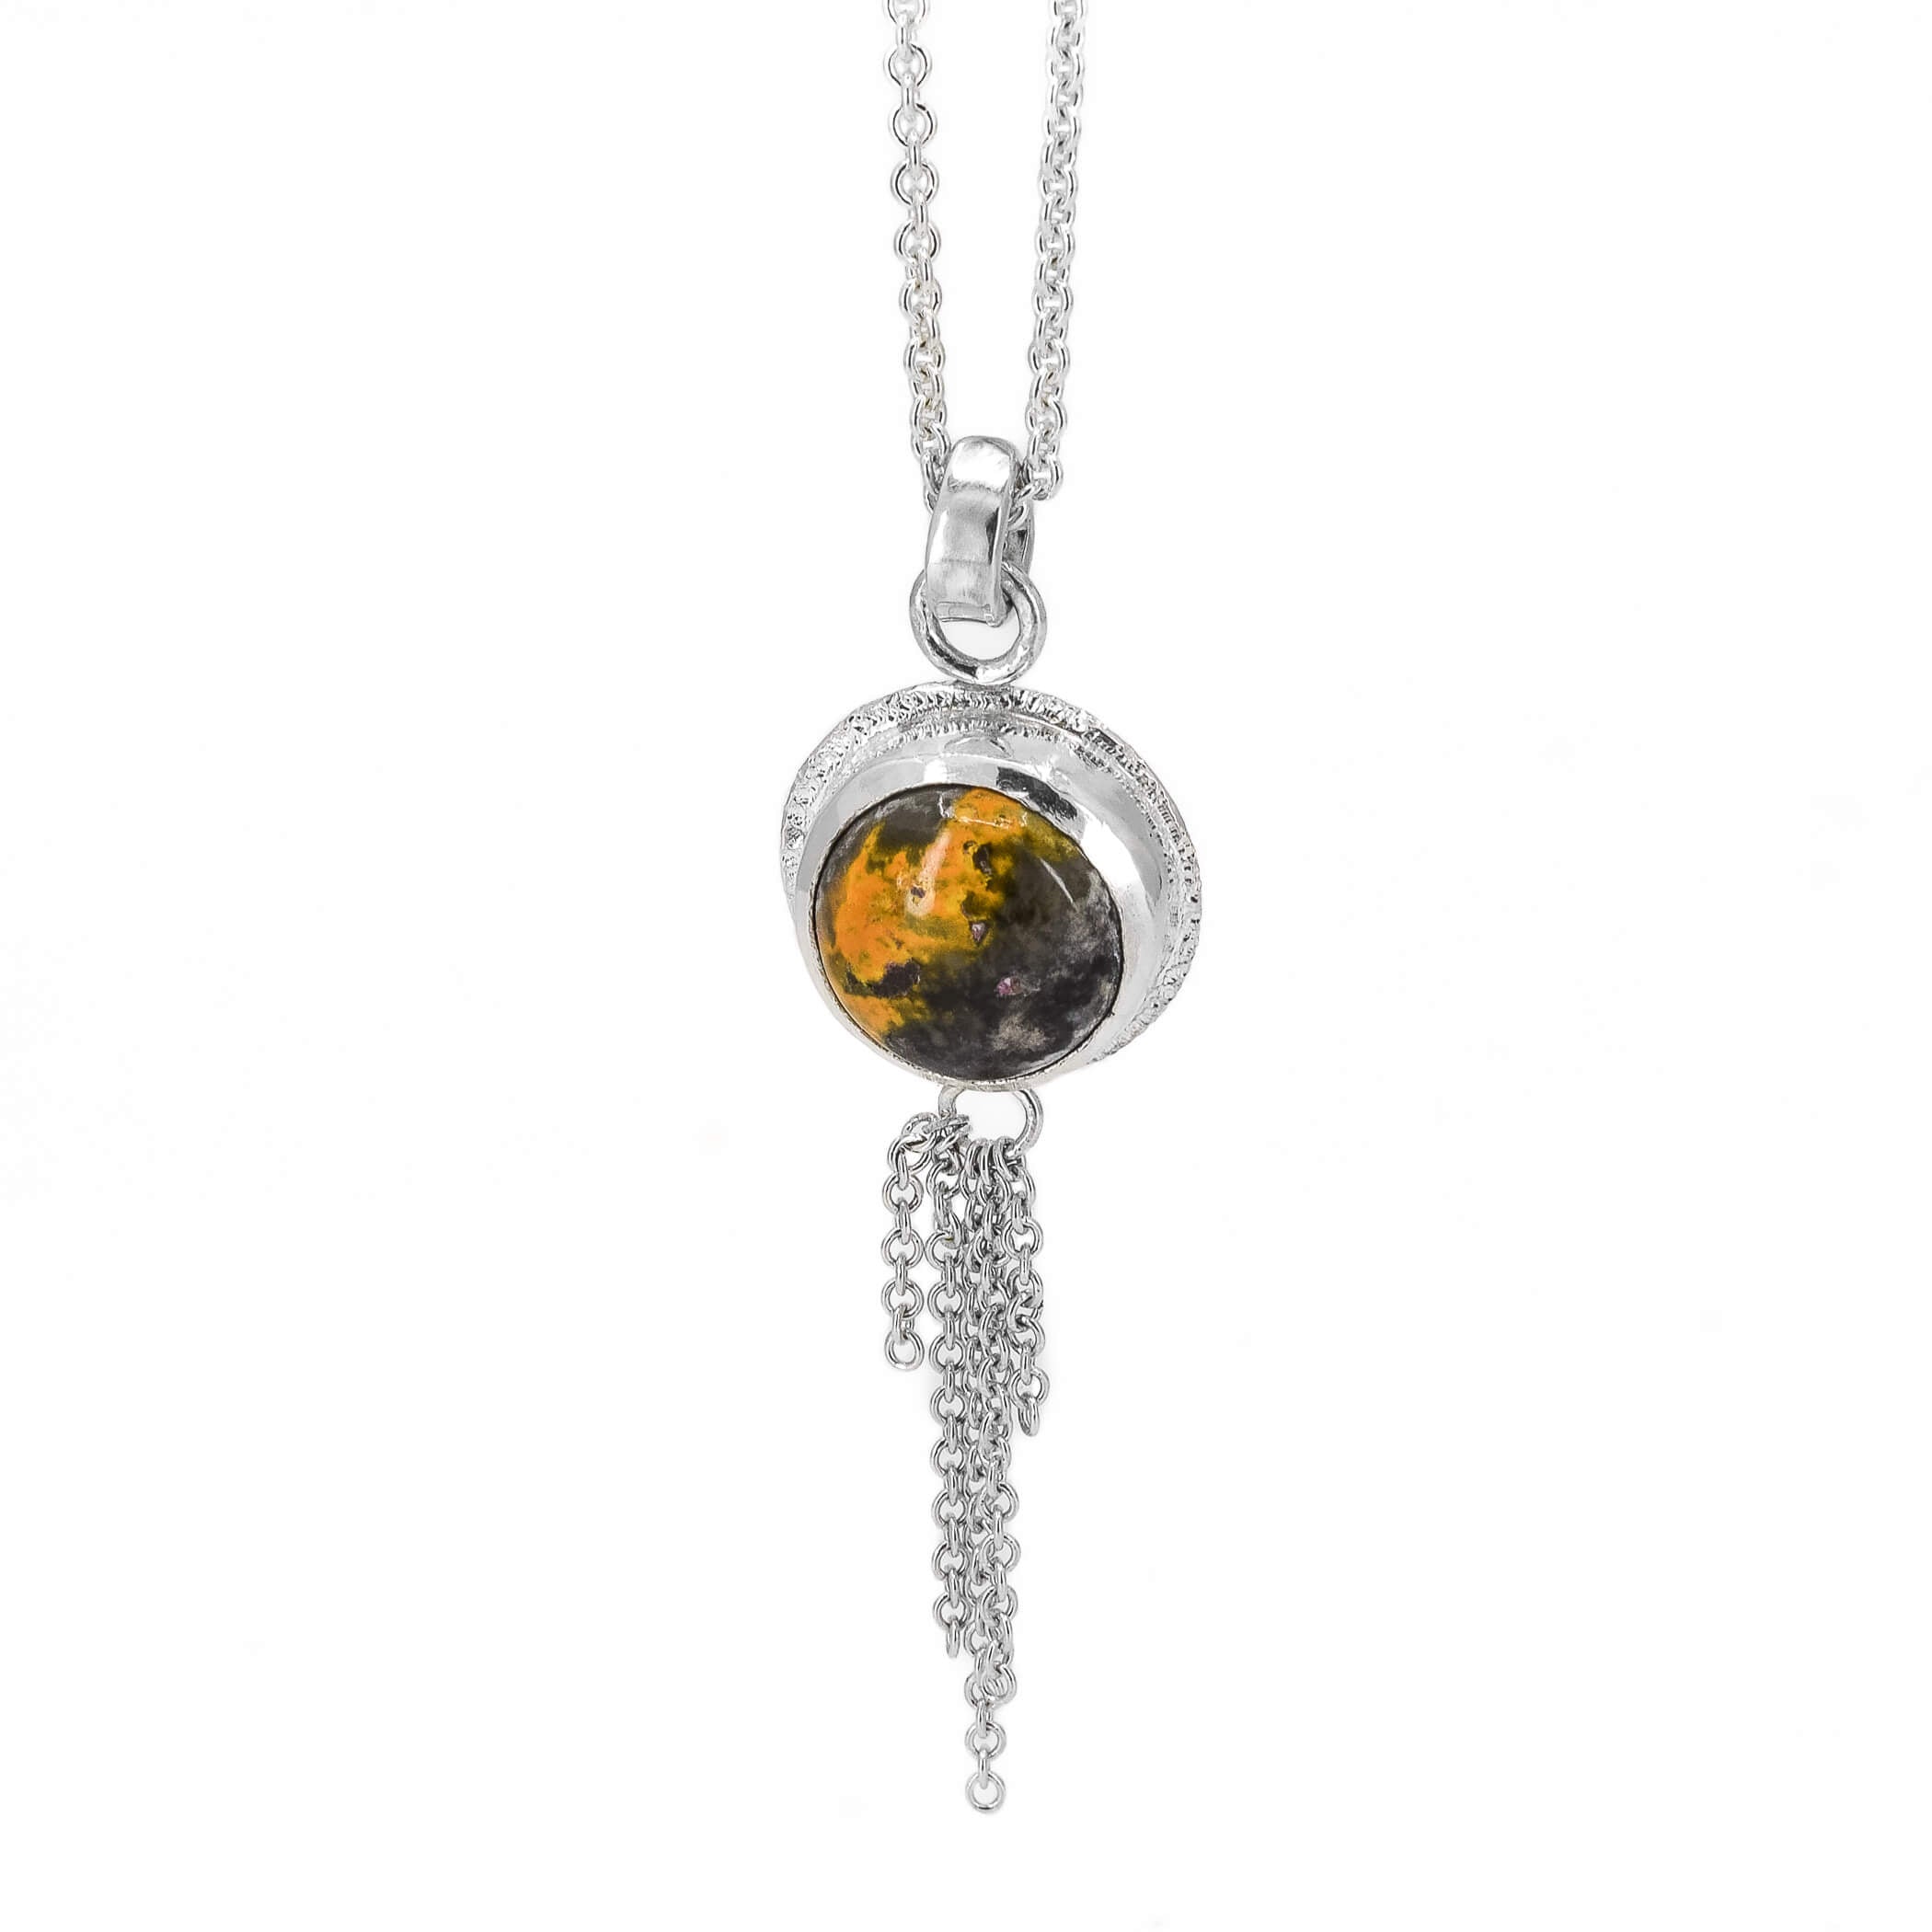 sterling silver necklace featuring a round bumblebee jasper stone, with a stardust texture around the edges and a chain embellishment at the bottom of the pendant